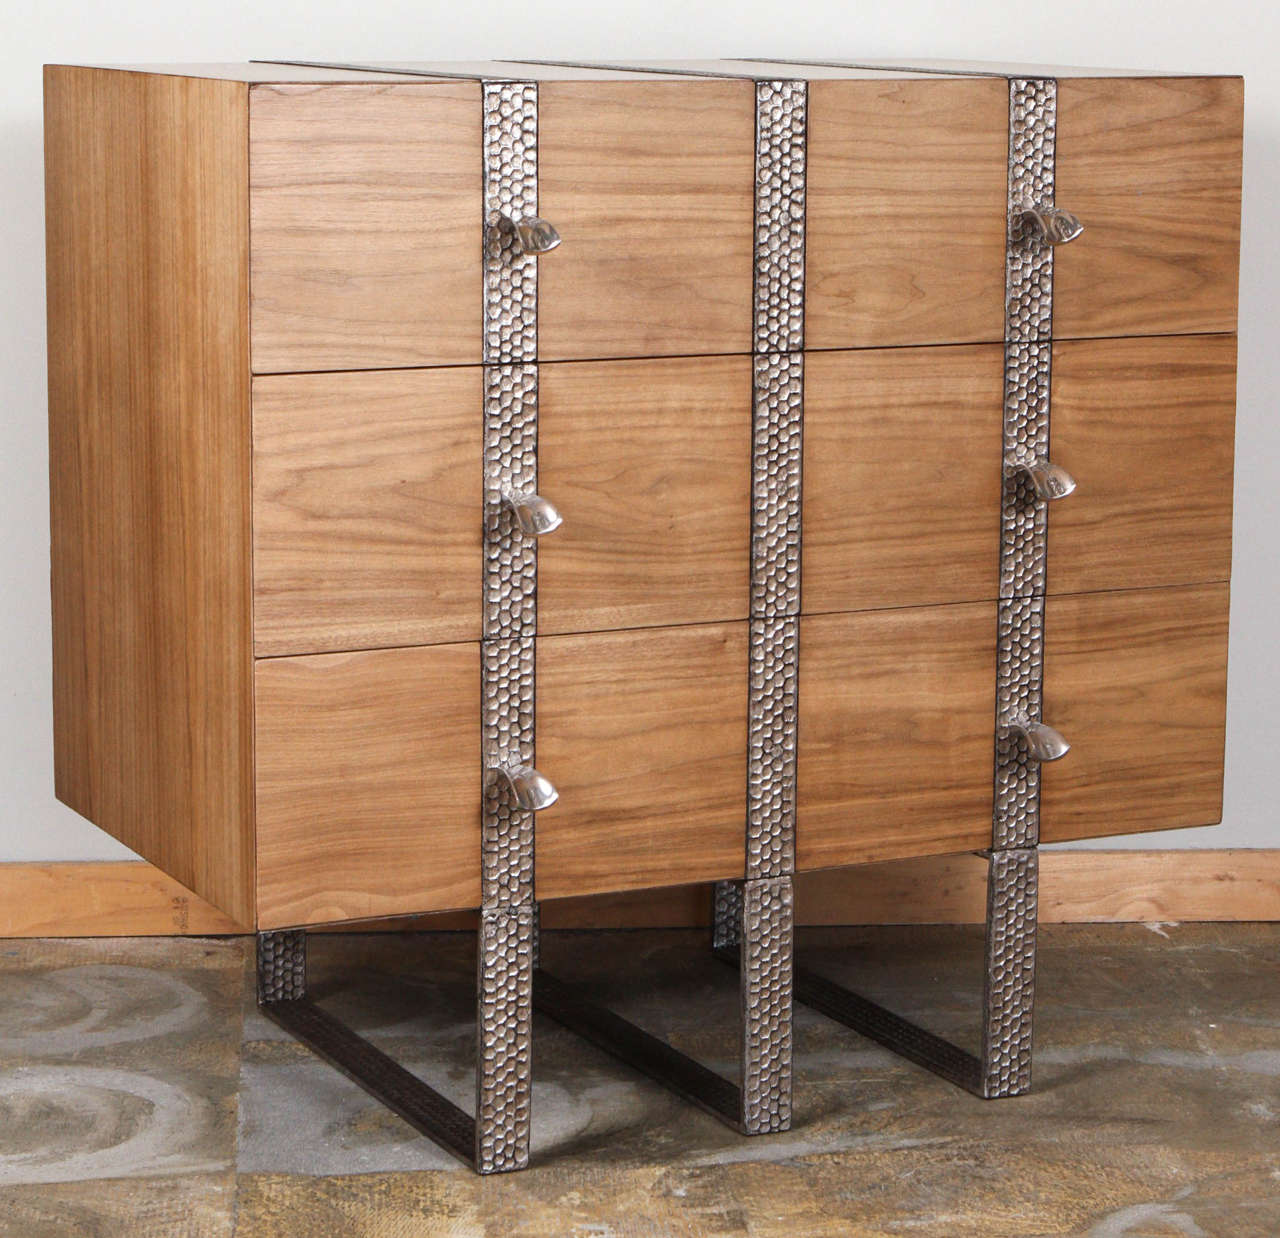 Paul Marra three-drawer chests with inset metal band shown in bleached walnut and embossed steel, mitered edges. As shown limited.  
Visit the Paul Marra storefront to see more furnishings and lighting including 21st century